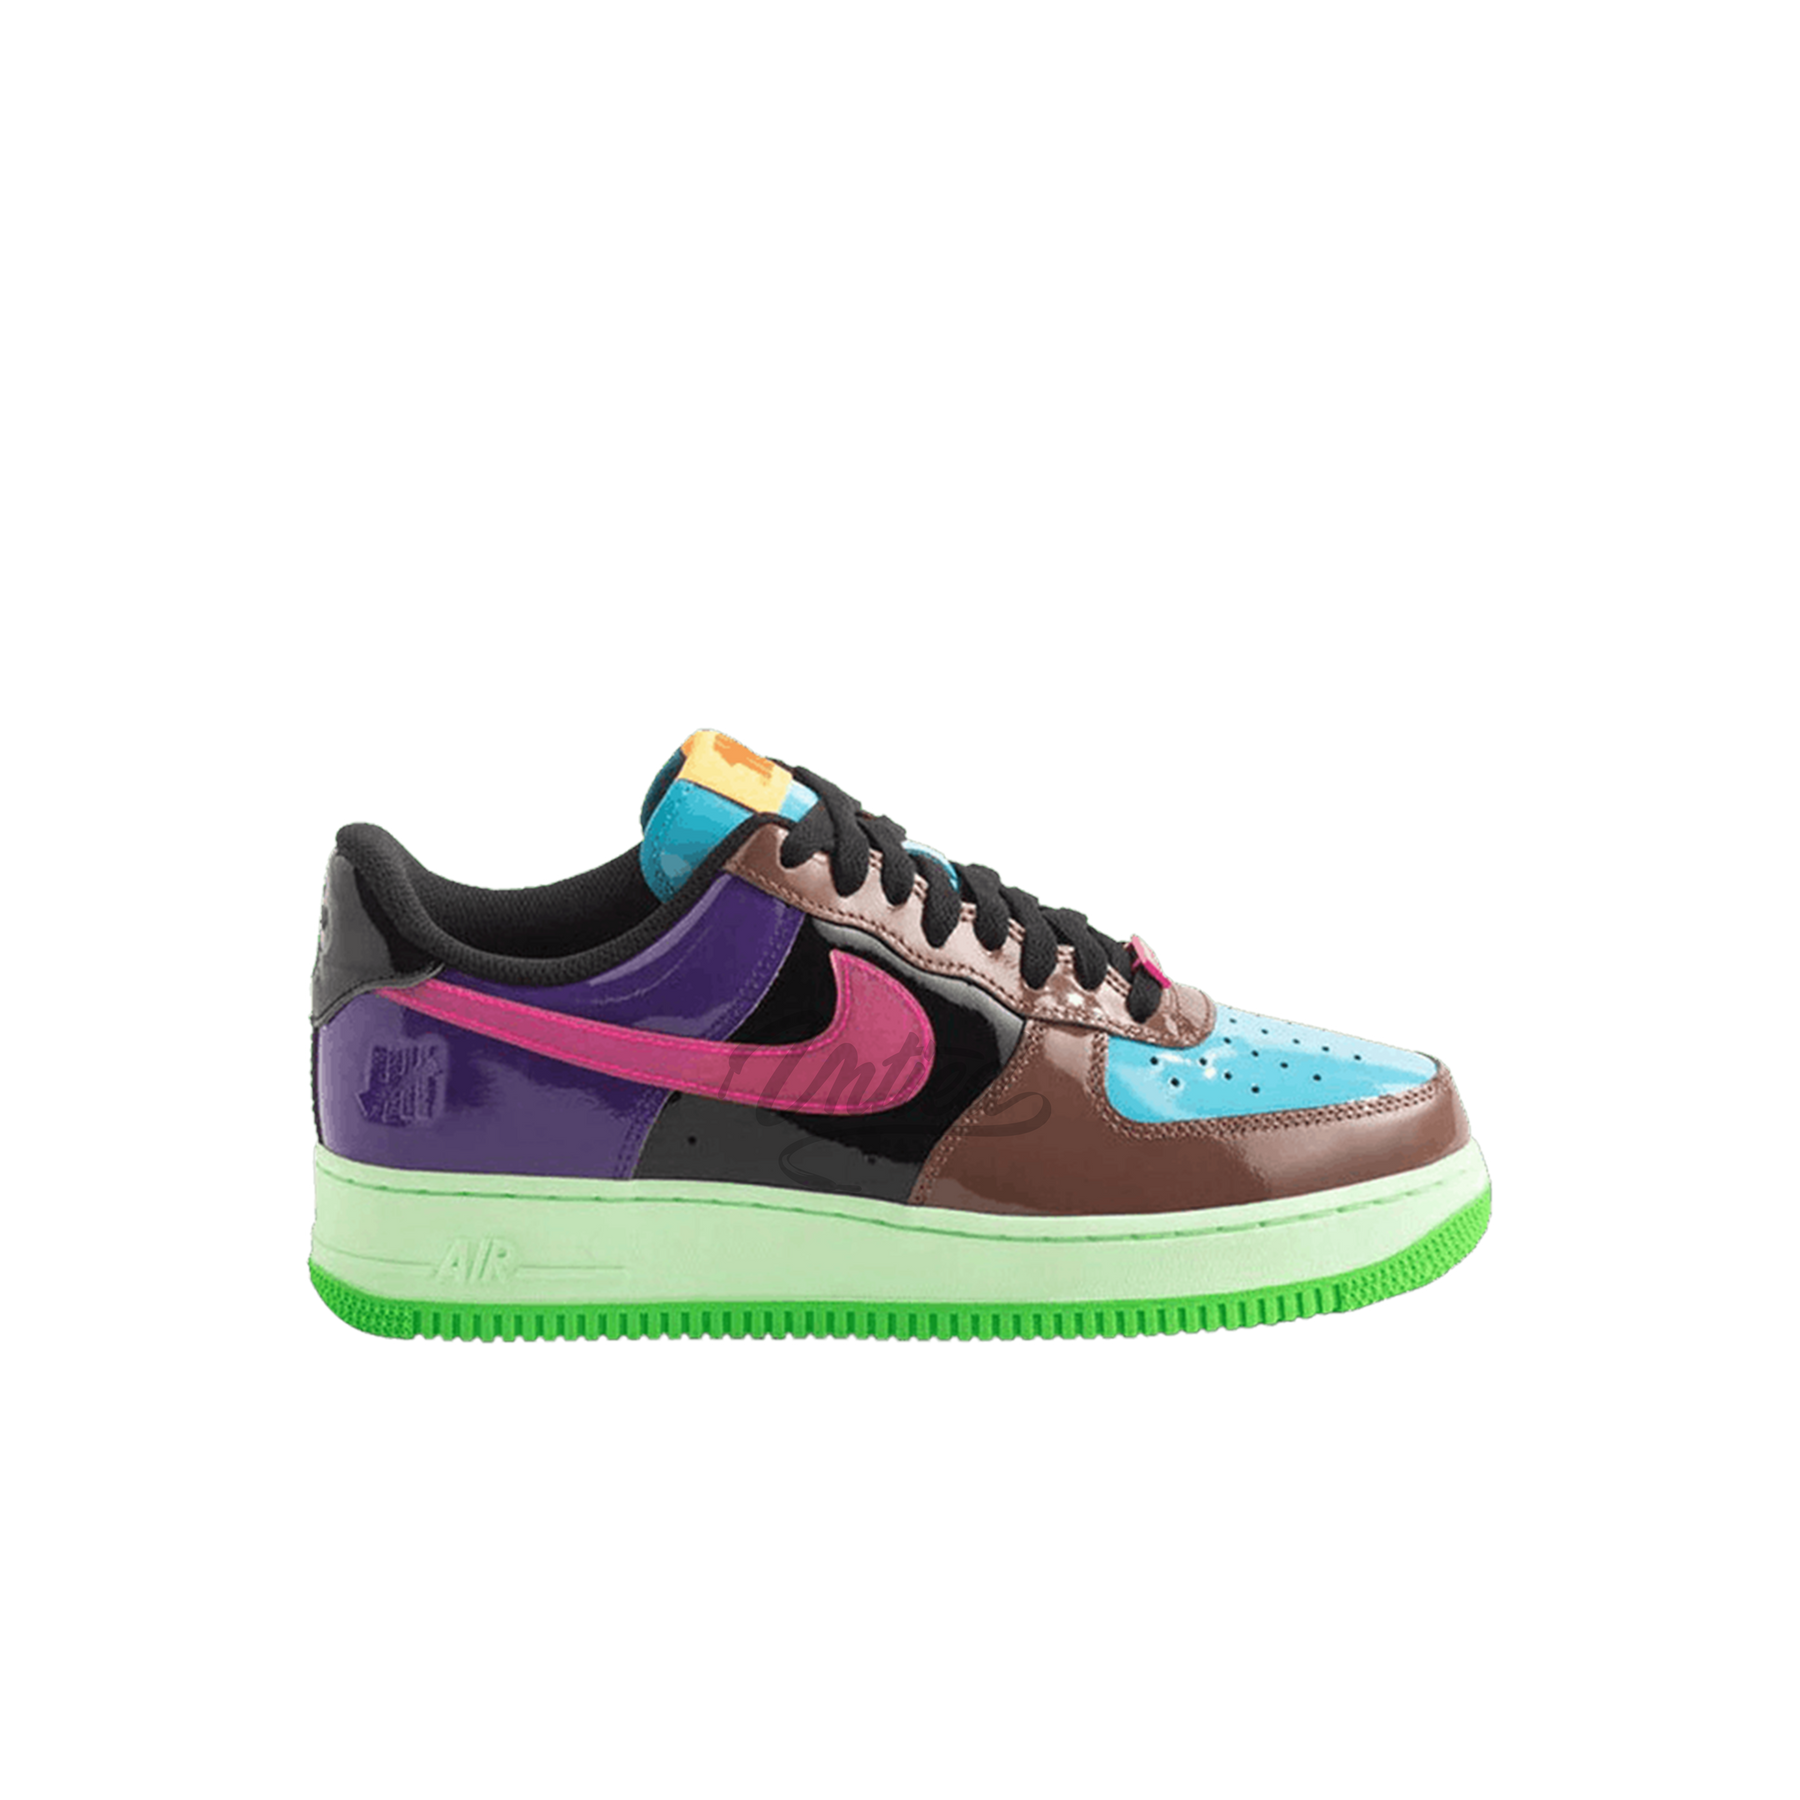 Air Force 1 "Undefeated Multi-Patent Pink Prime"